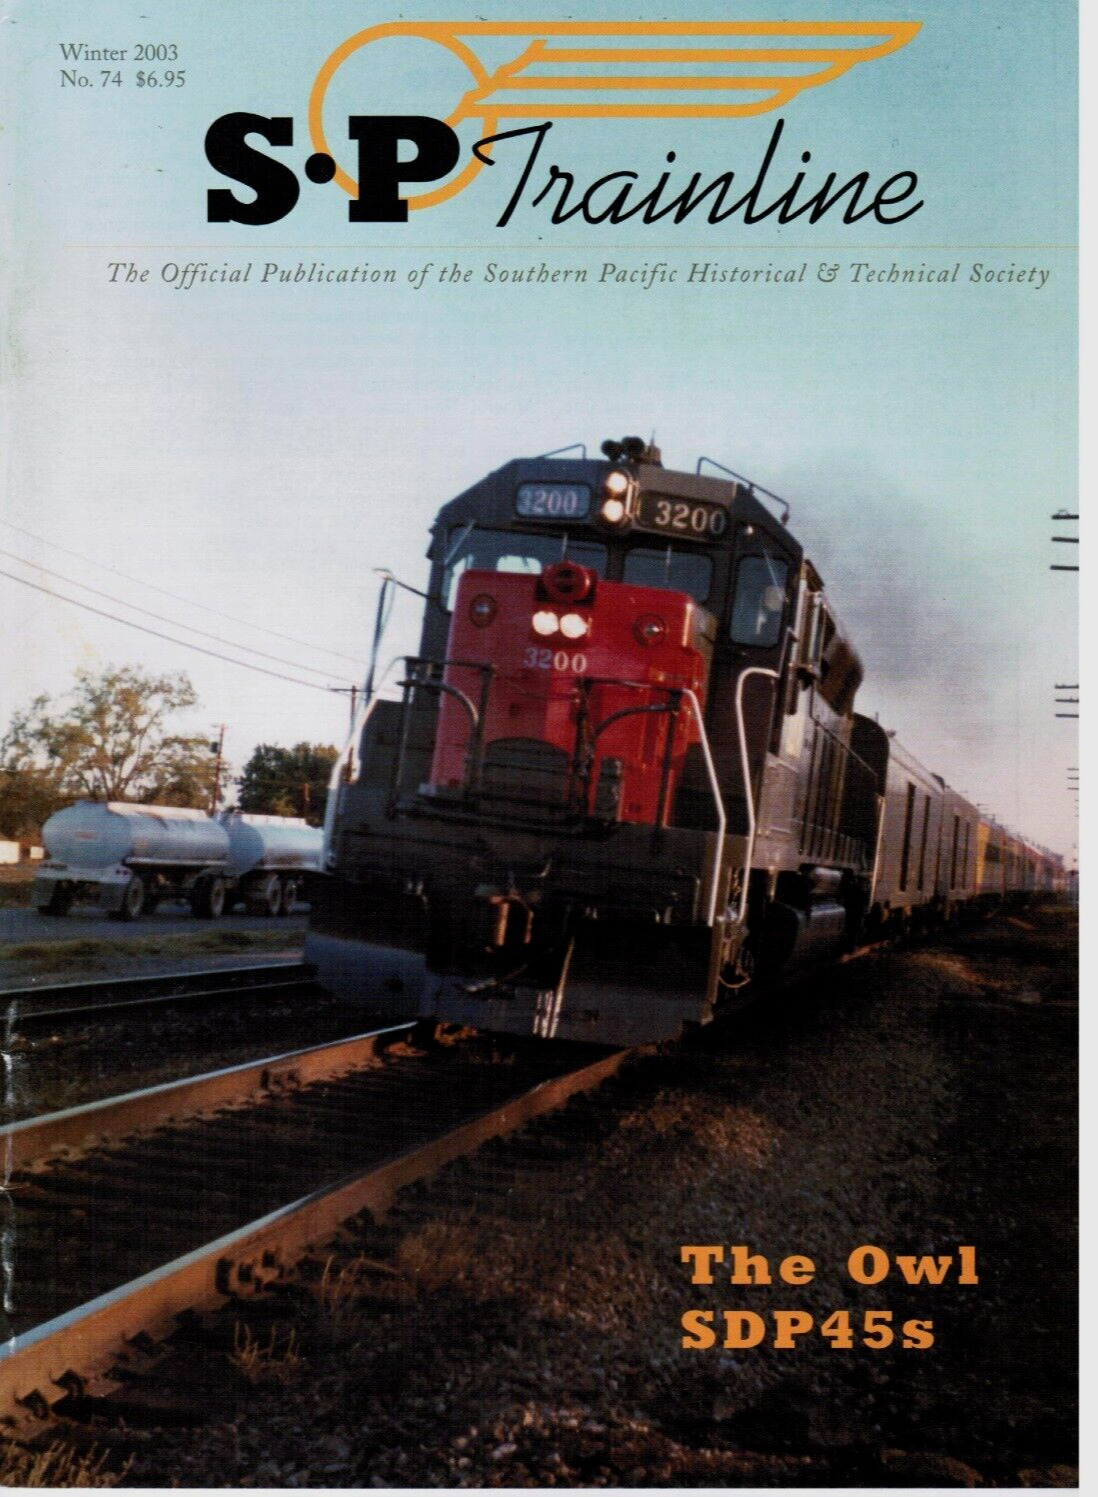 SP TRAINLINE MAG WINTER 2003 NO 74 - PUB. SOUTHERN PACIFIC HISTORICAL & TECH SOC